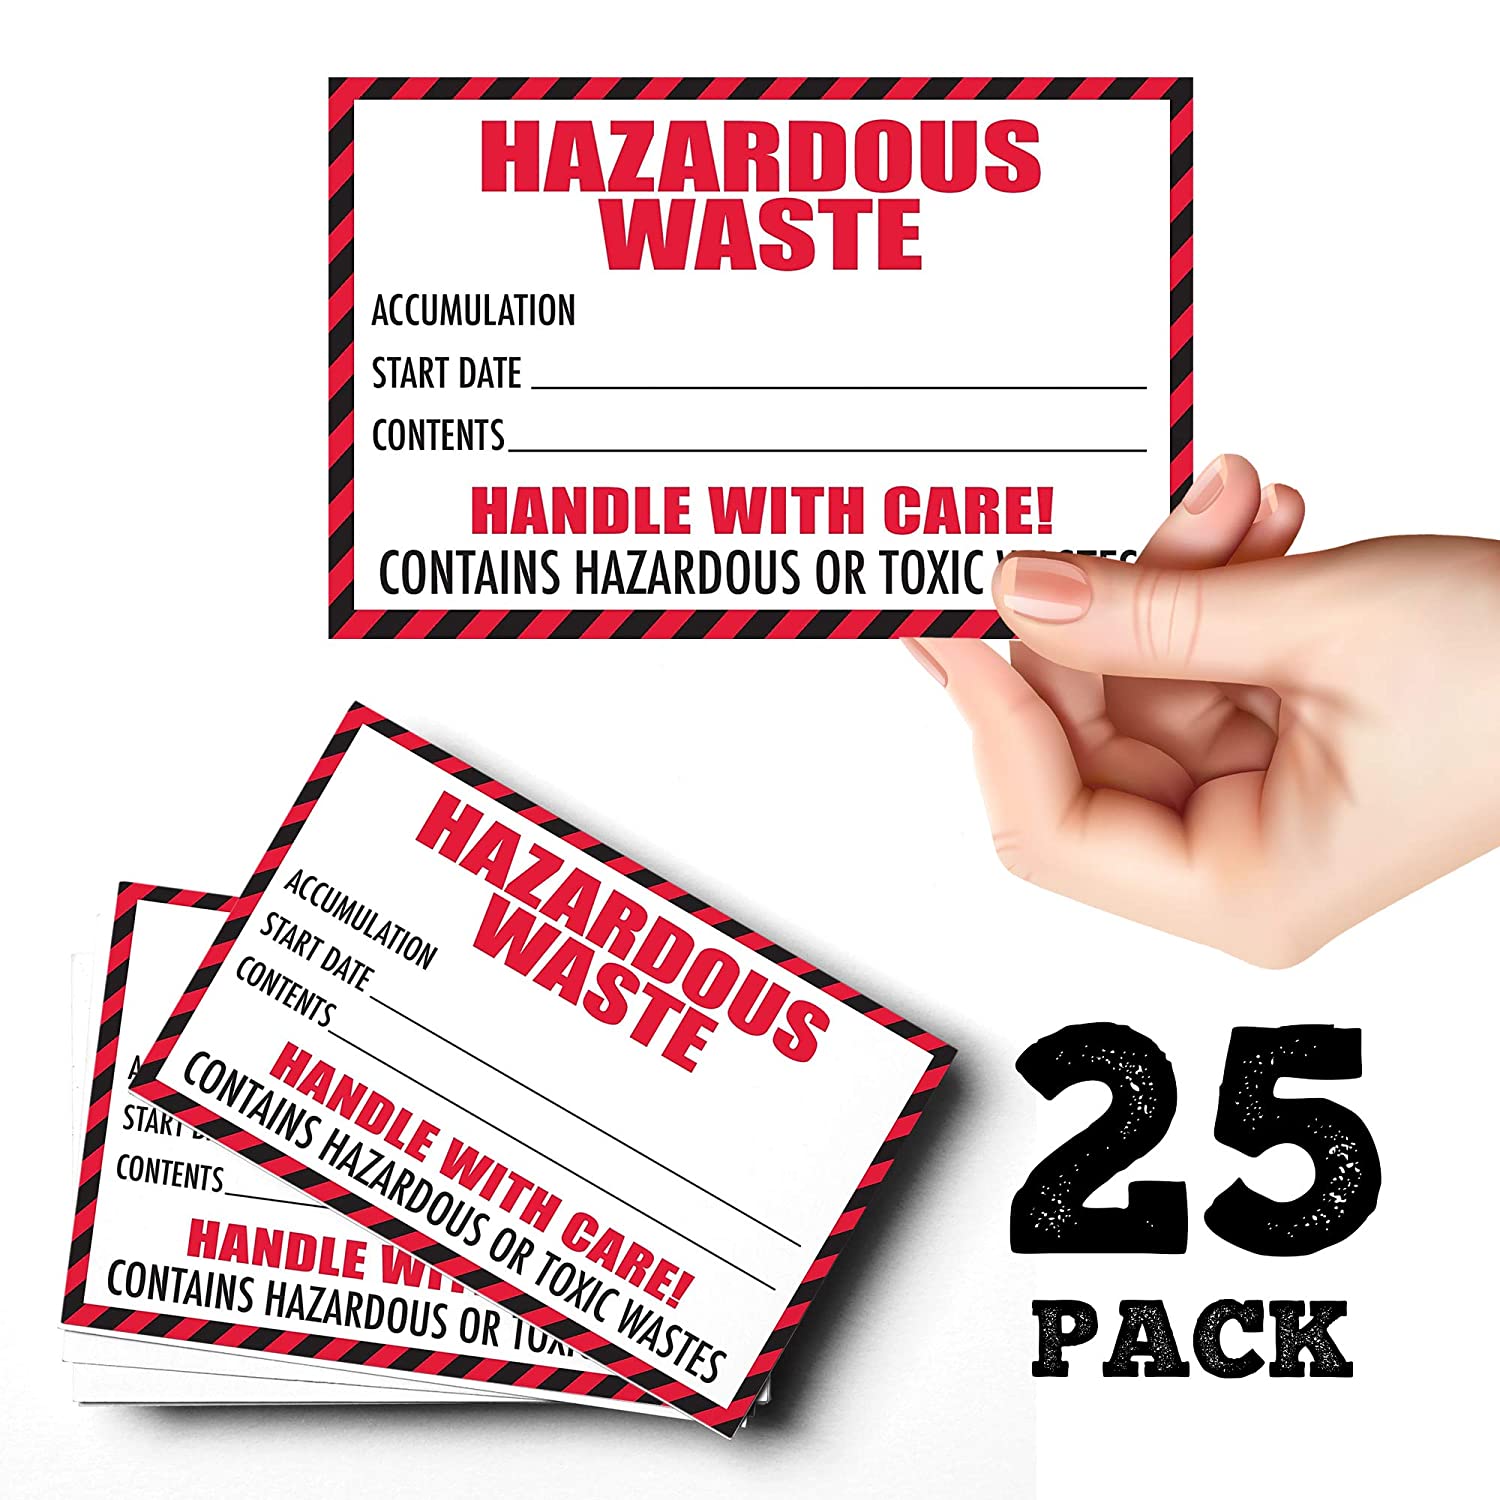 Hazardous Waste Label with Handle with Care, 4x6 in dimensions